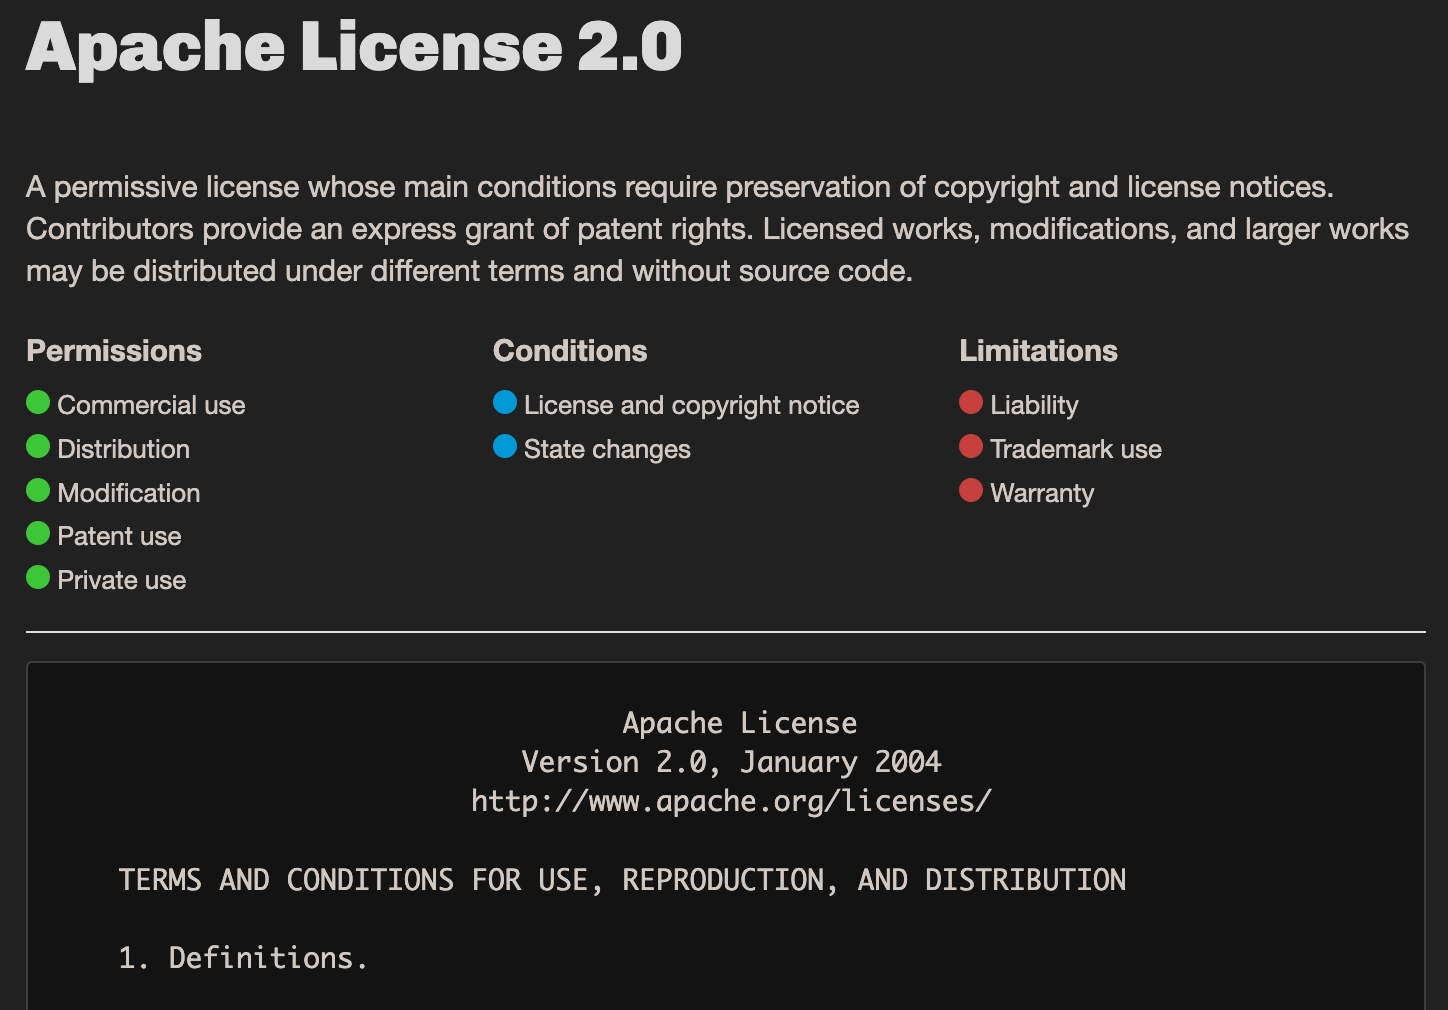 Apache 2.0: The most business-friendly open source license for small companies.